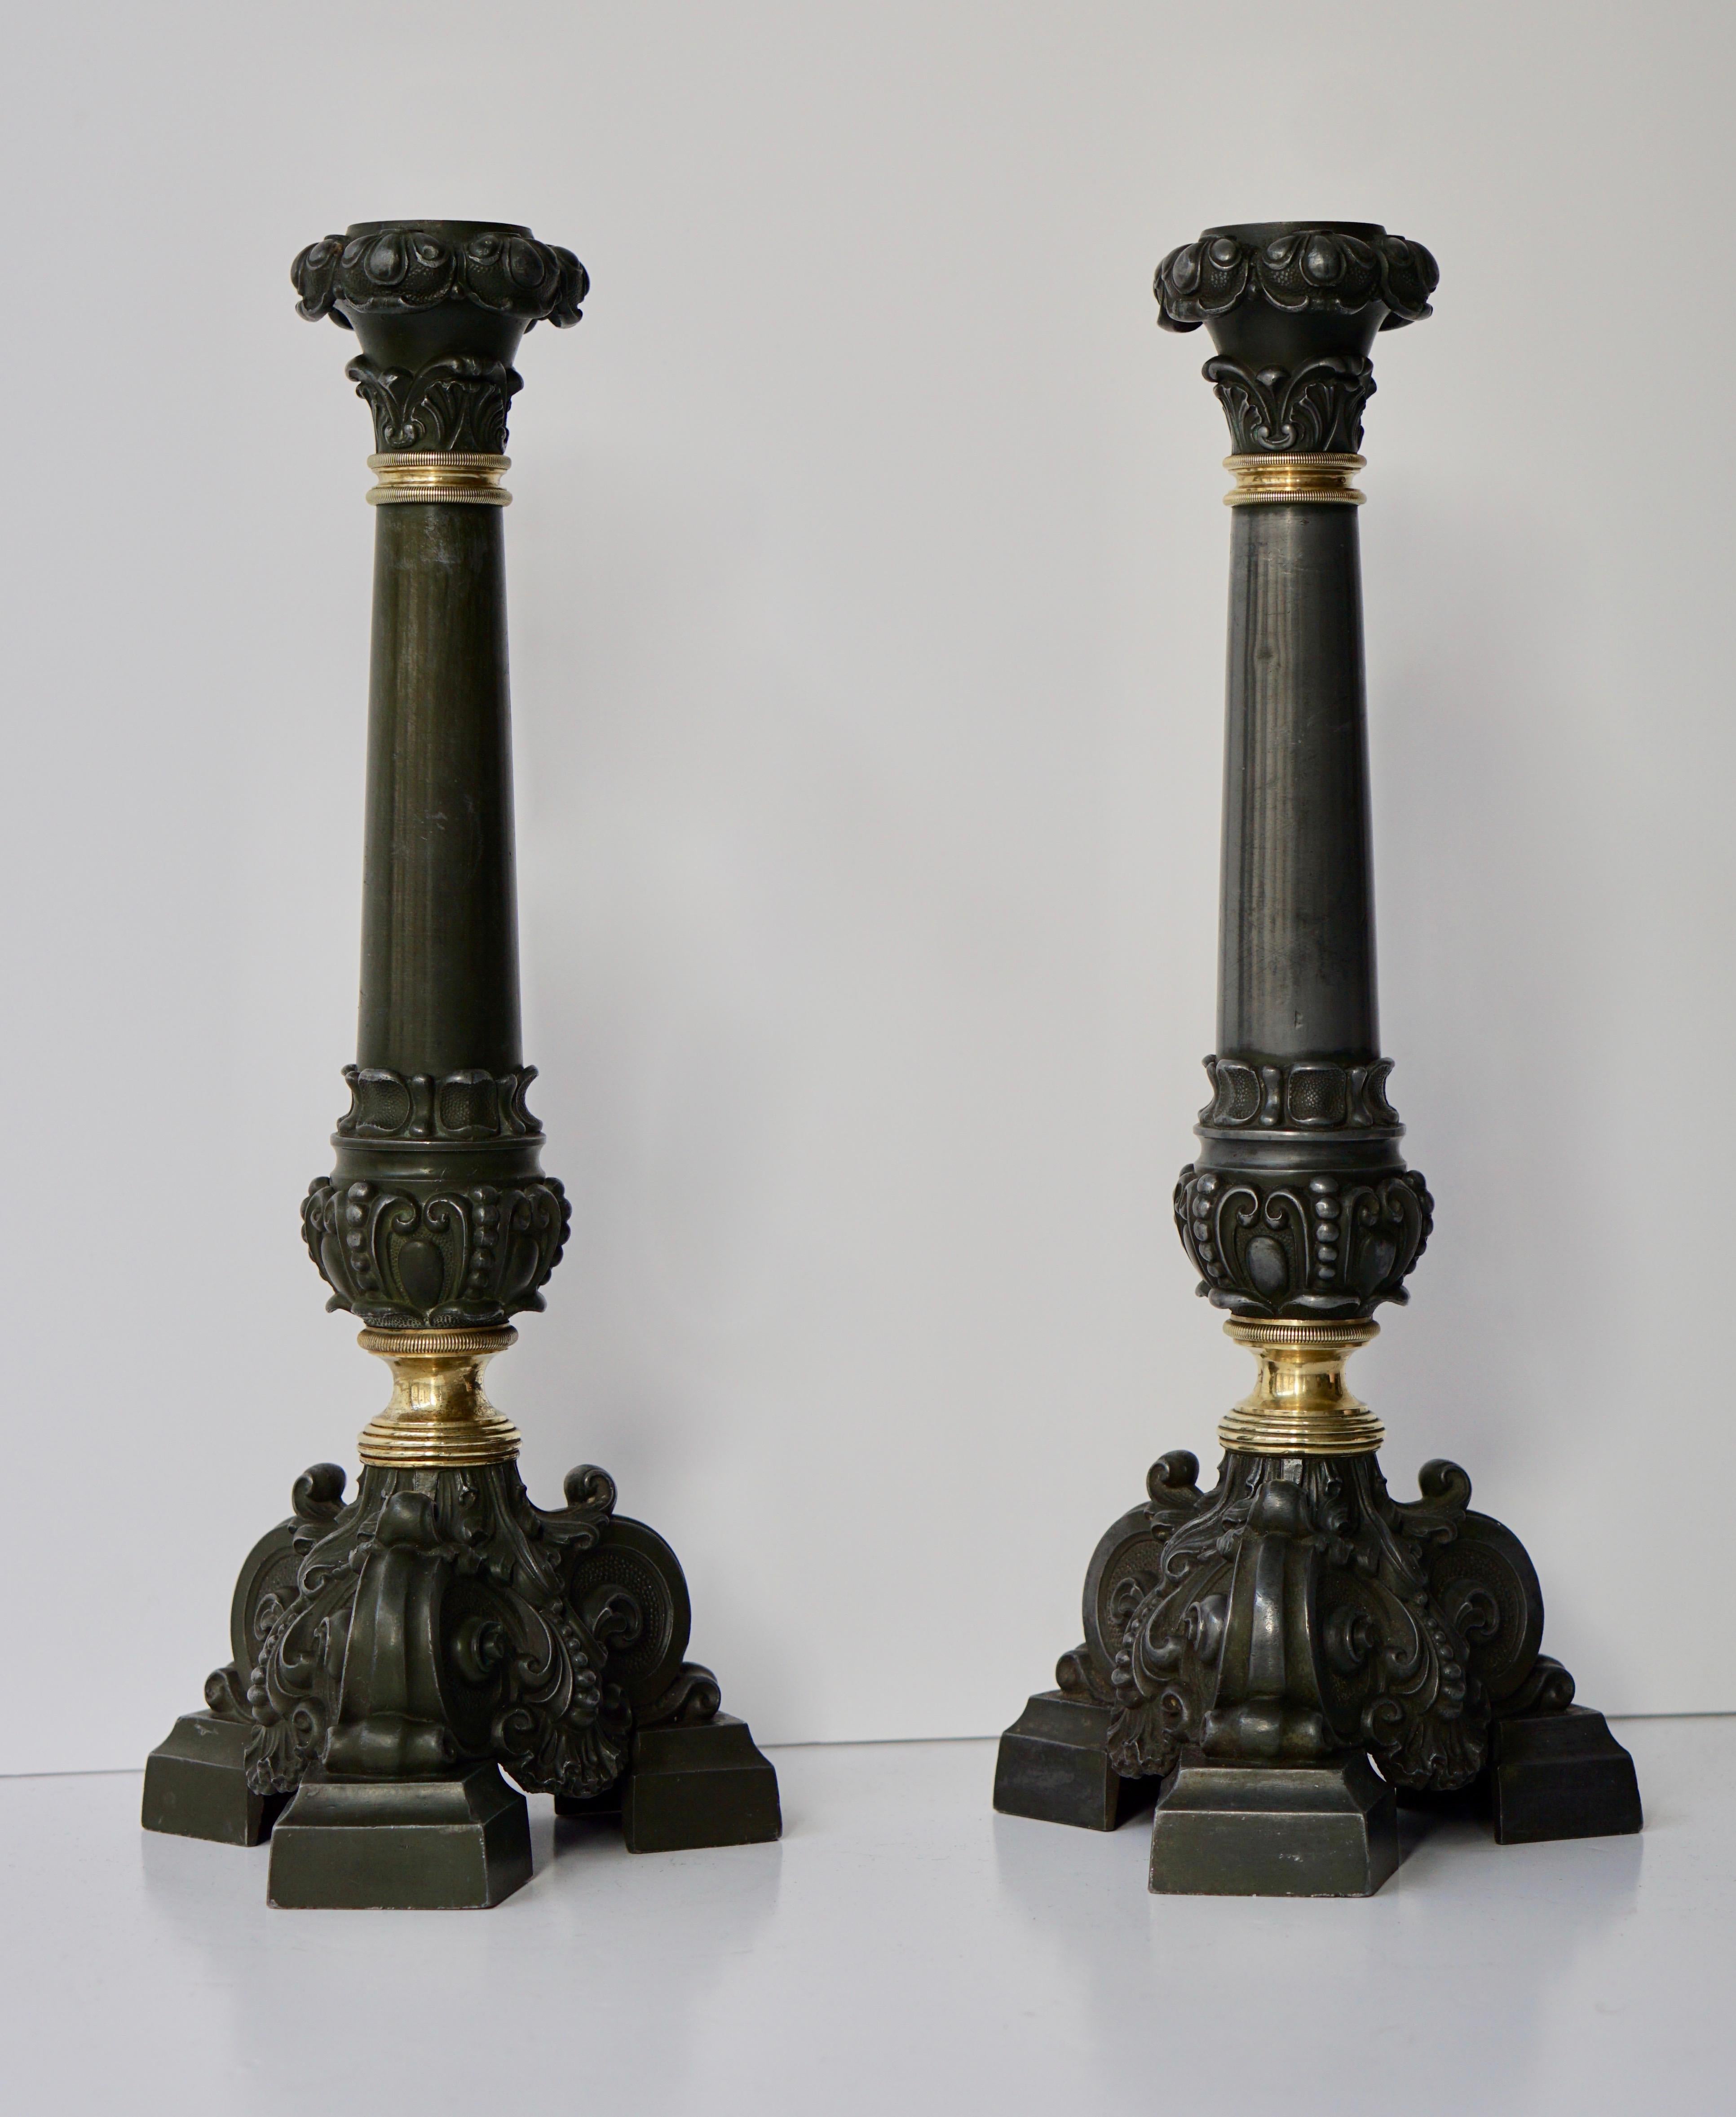 Italian late 19th century pair of antique brass candleholders.
This pair of antique brass candleholders was handcrafted by Italian artisan.

These objects donate a glamour and untimeless touch to the table set up.